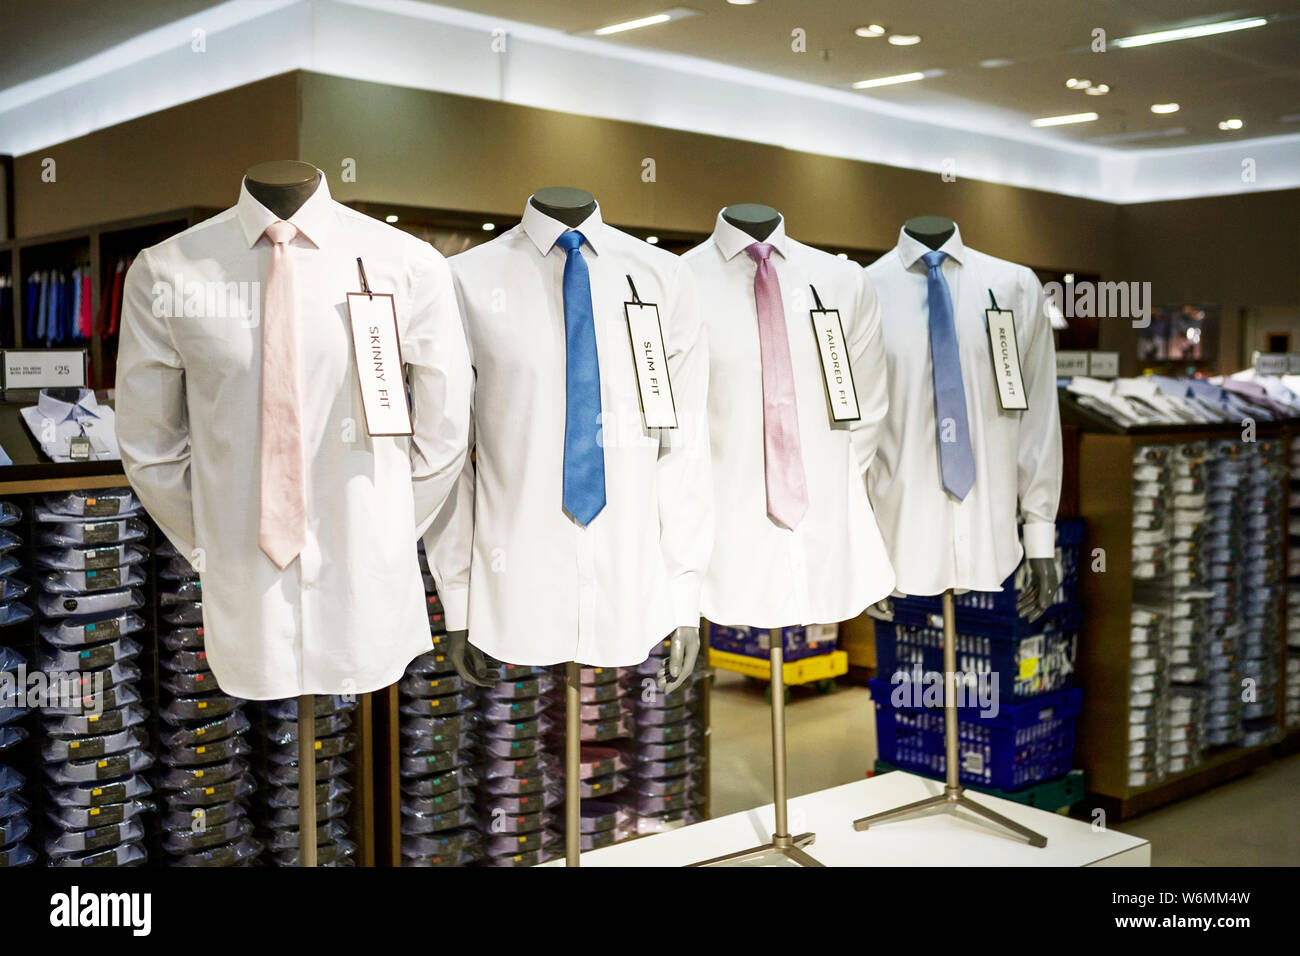 M&S, Marks and Spencer clothes: men's shirts on display Stock Photo - Alamy